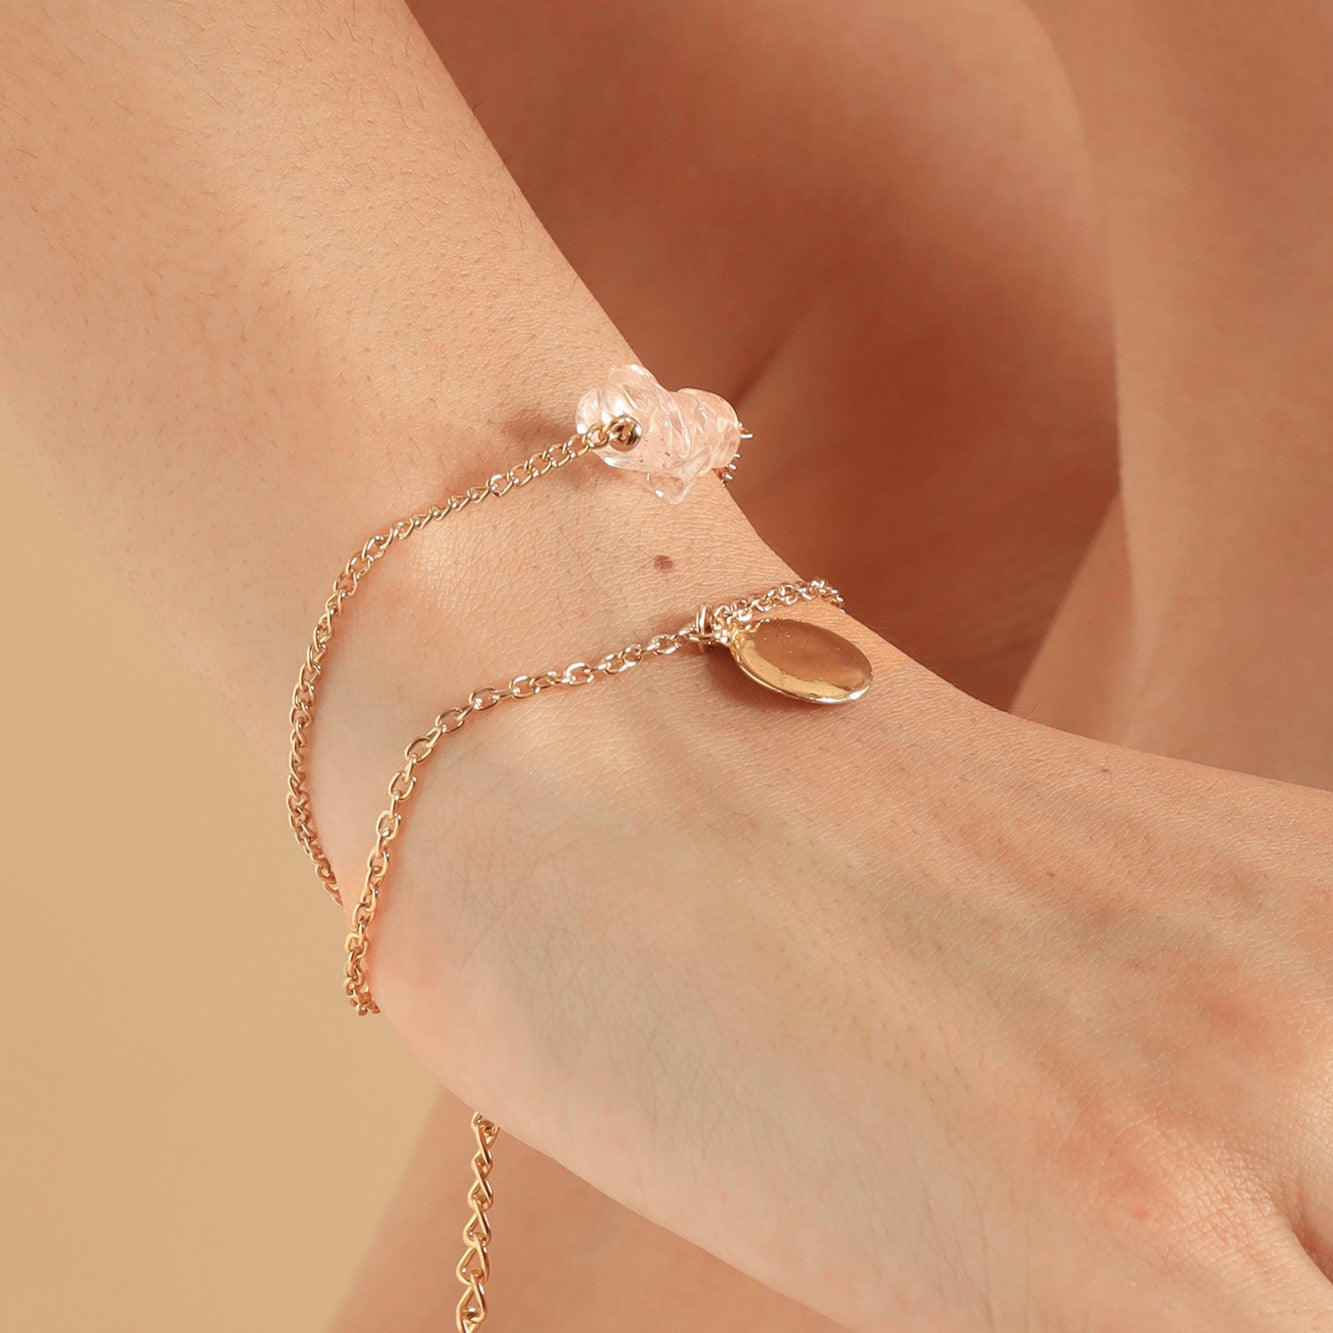 TFC Pink Stone Gold Plated Bracelet-Discover our stunning collection of stylish bracelets for women, featuring exquisite pearl bracelets, handcrafted beaded bracelets, and elegant gold-plated designs. Enjoy cheapest anti-tarnish fashion jewellery and long-lasting brillia